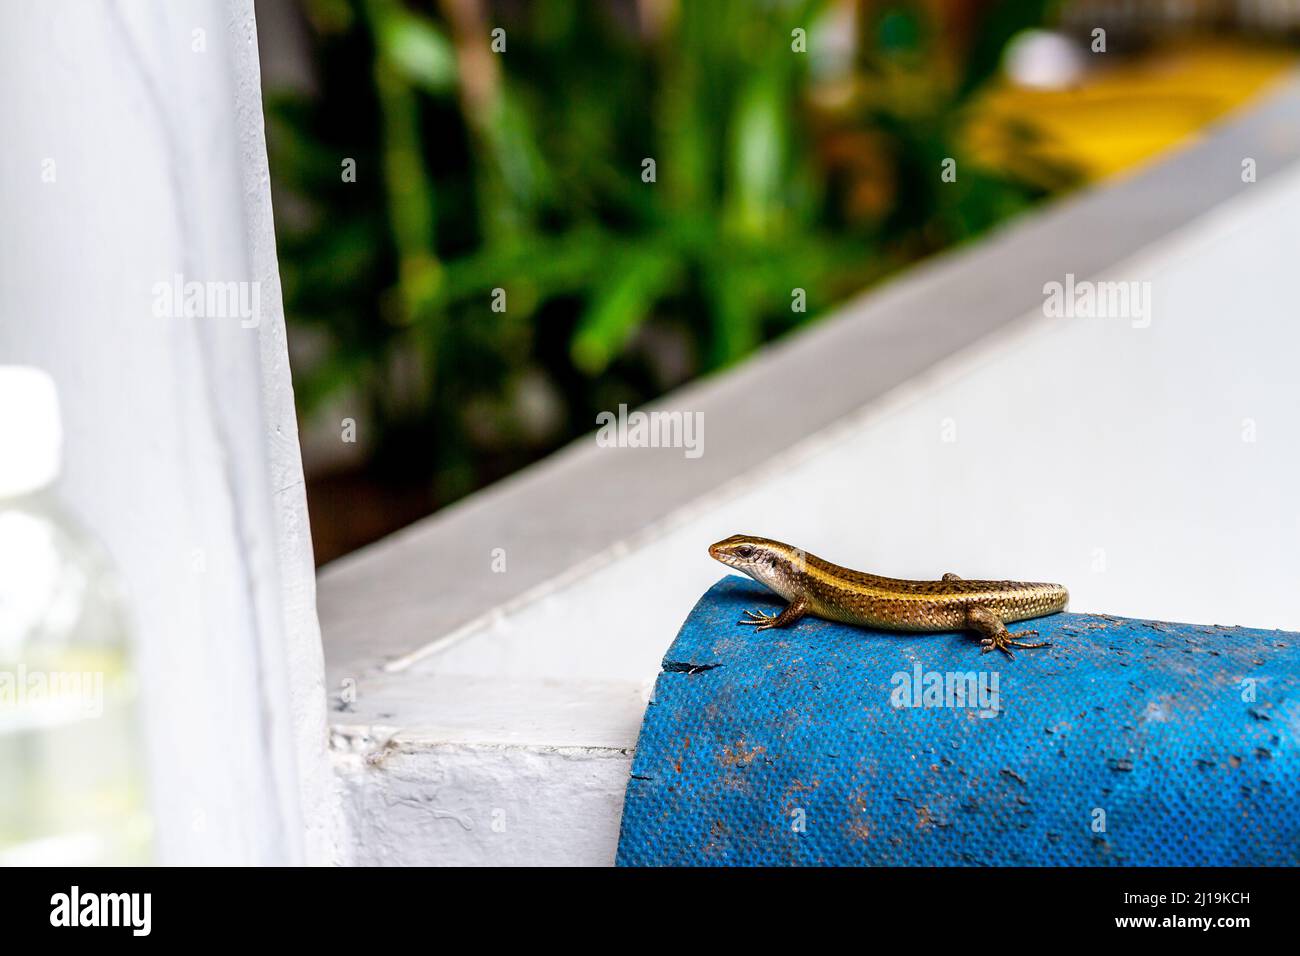 A lizard is sunbathing on a blue carpet being dried, its habitat has been evicted by offices Stock Photo